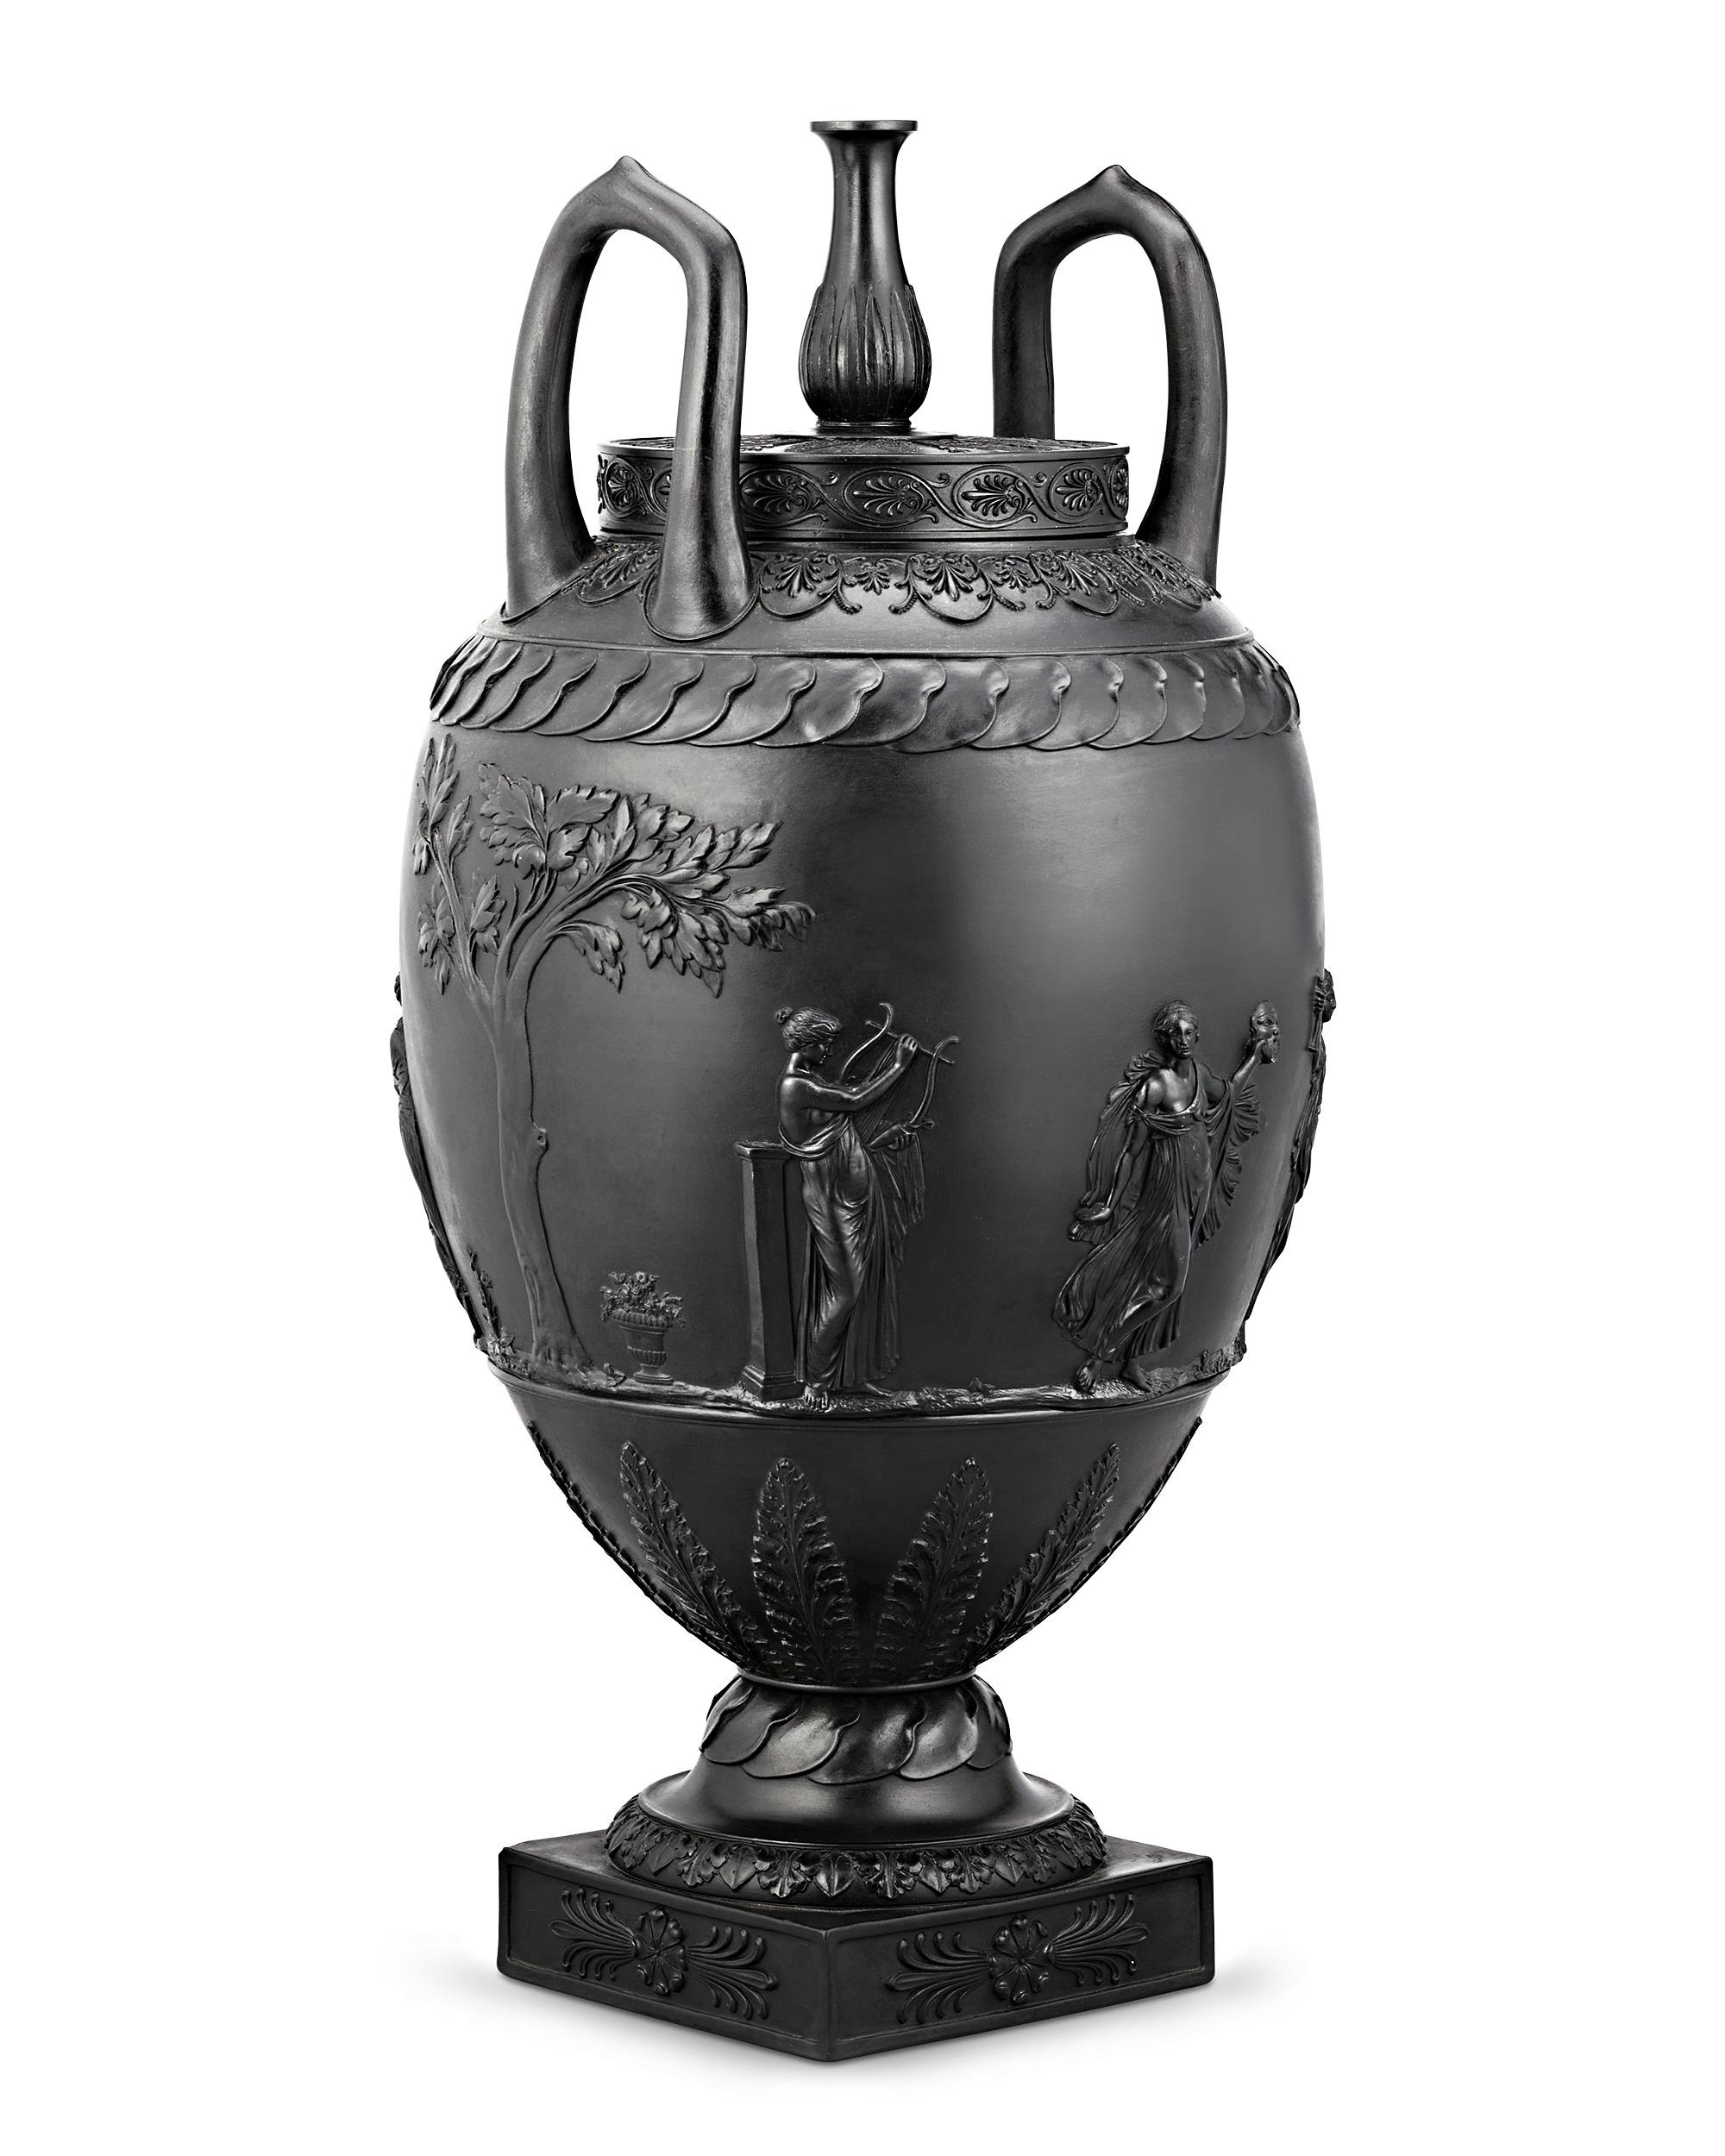 A remarkable example of Josiah Wedgwood's legendary ceramic art, the importance and rarity of this urn vase simply cannot be overstated. Black basalt refers to the fine-grained stoneware developed by Josiah Wedgwood in the 1760s that was inspired by